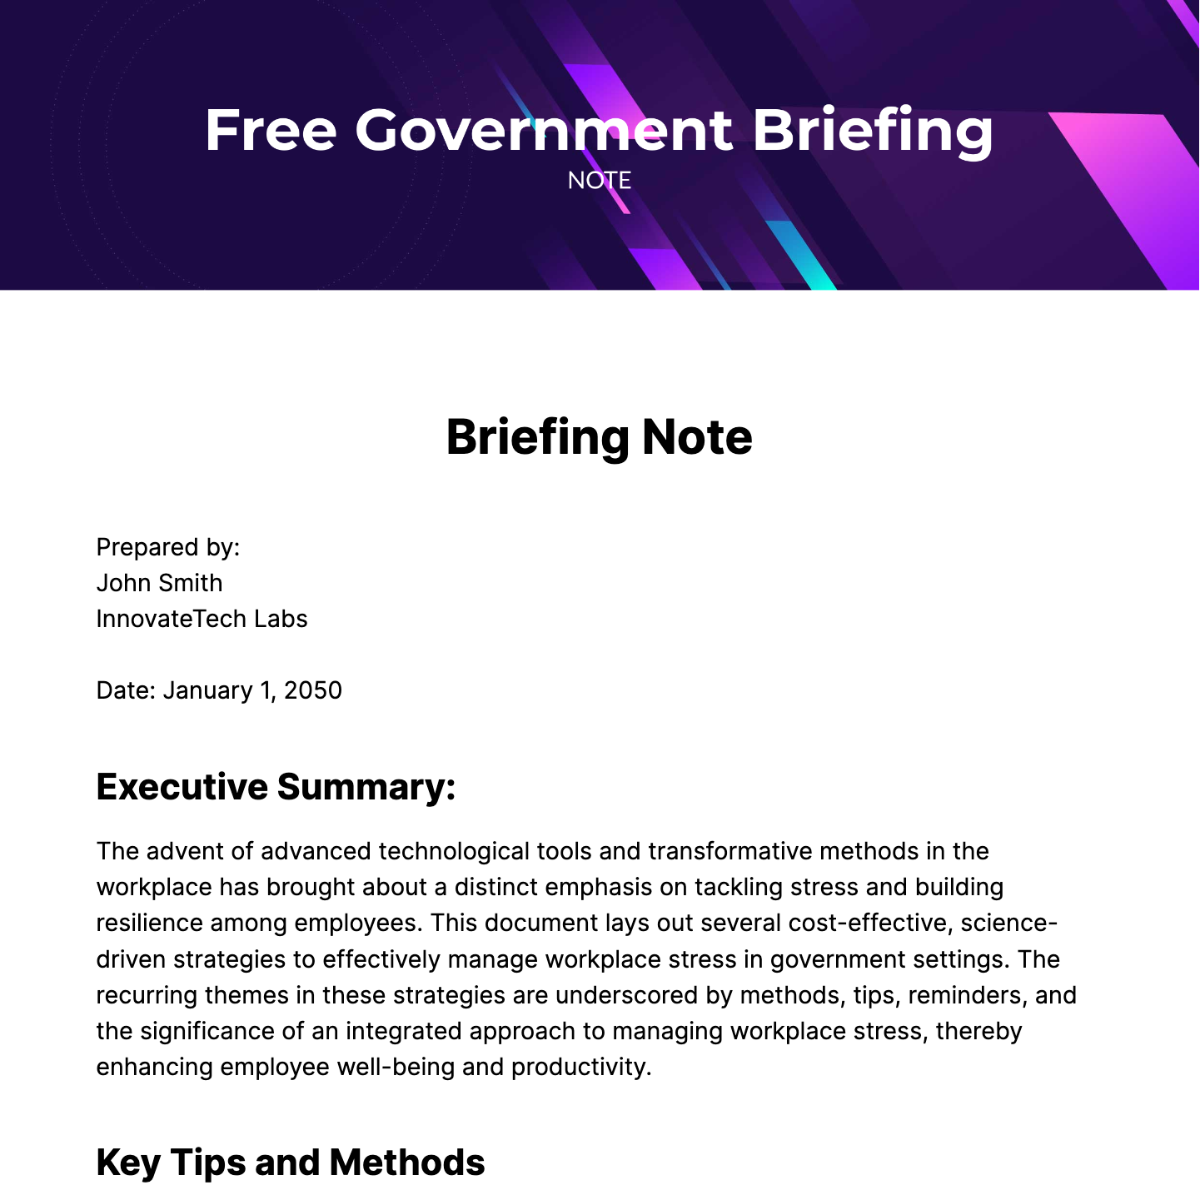 Free Government Briefing Note Template